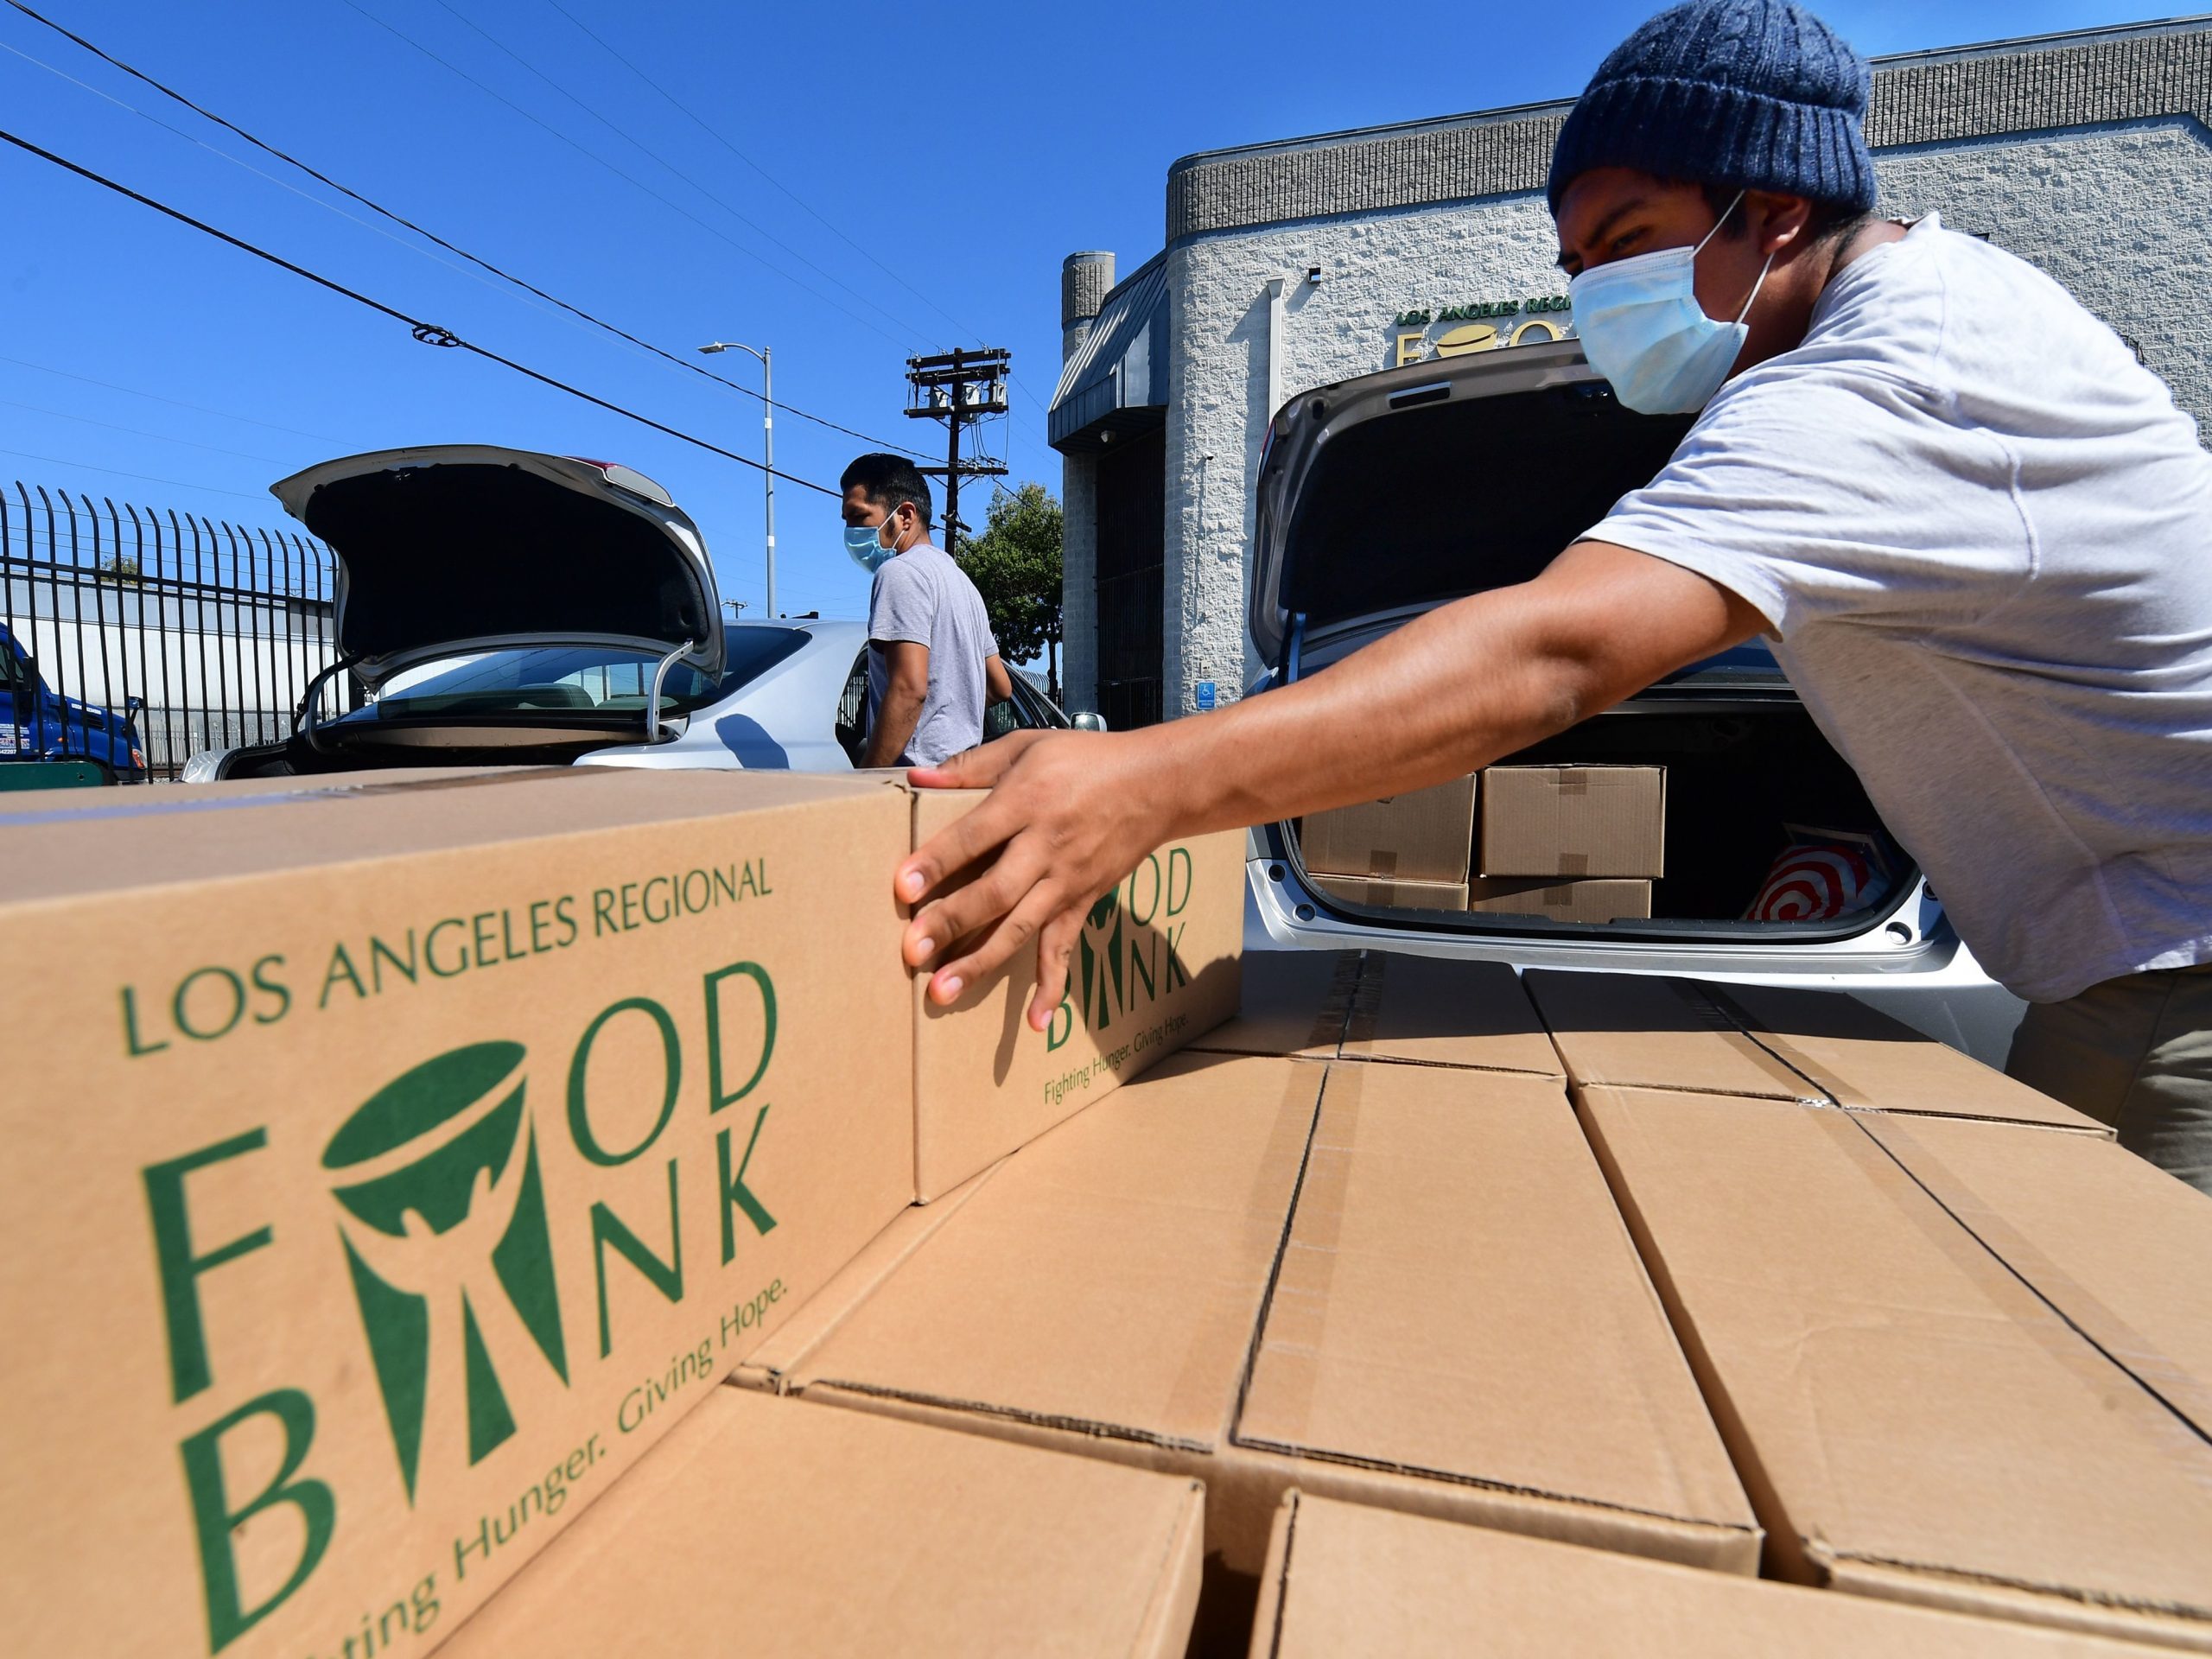 Boxes of food are loaded on vehicles last month at the Los Angeles Regional Food Bank. The country has officially entered a recession amid the pandemic, the National Bureau of Economic Research said Monday.